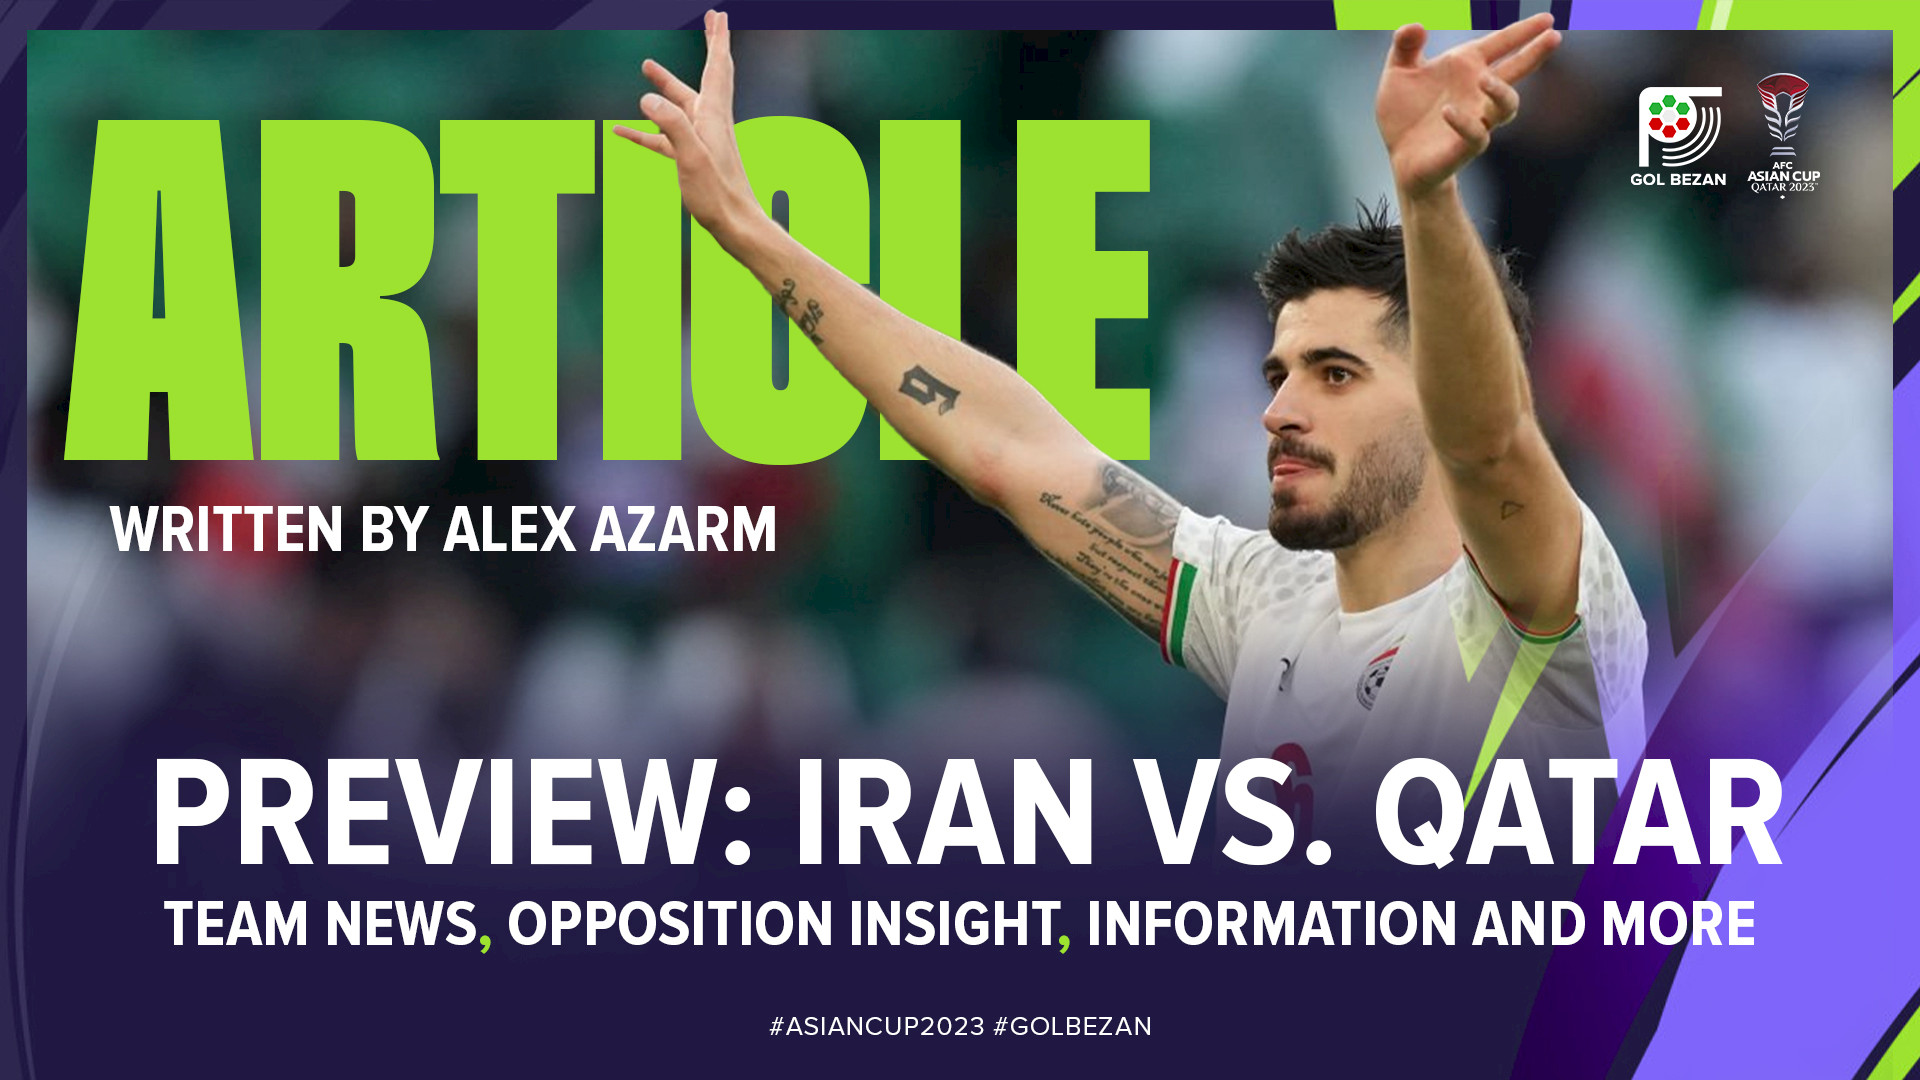 PREVIEW: Iran vs. Qatar | 2023 AFC Asian Cup - Team News, Opposition Insight, Predictions and More